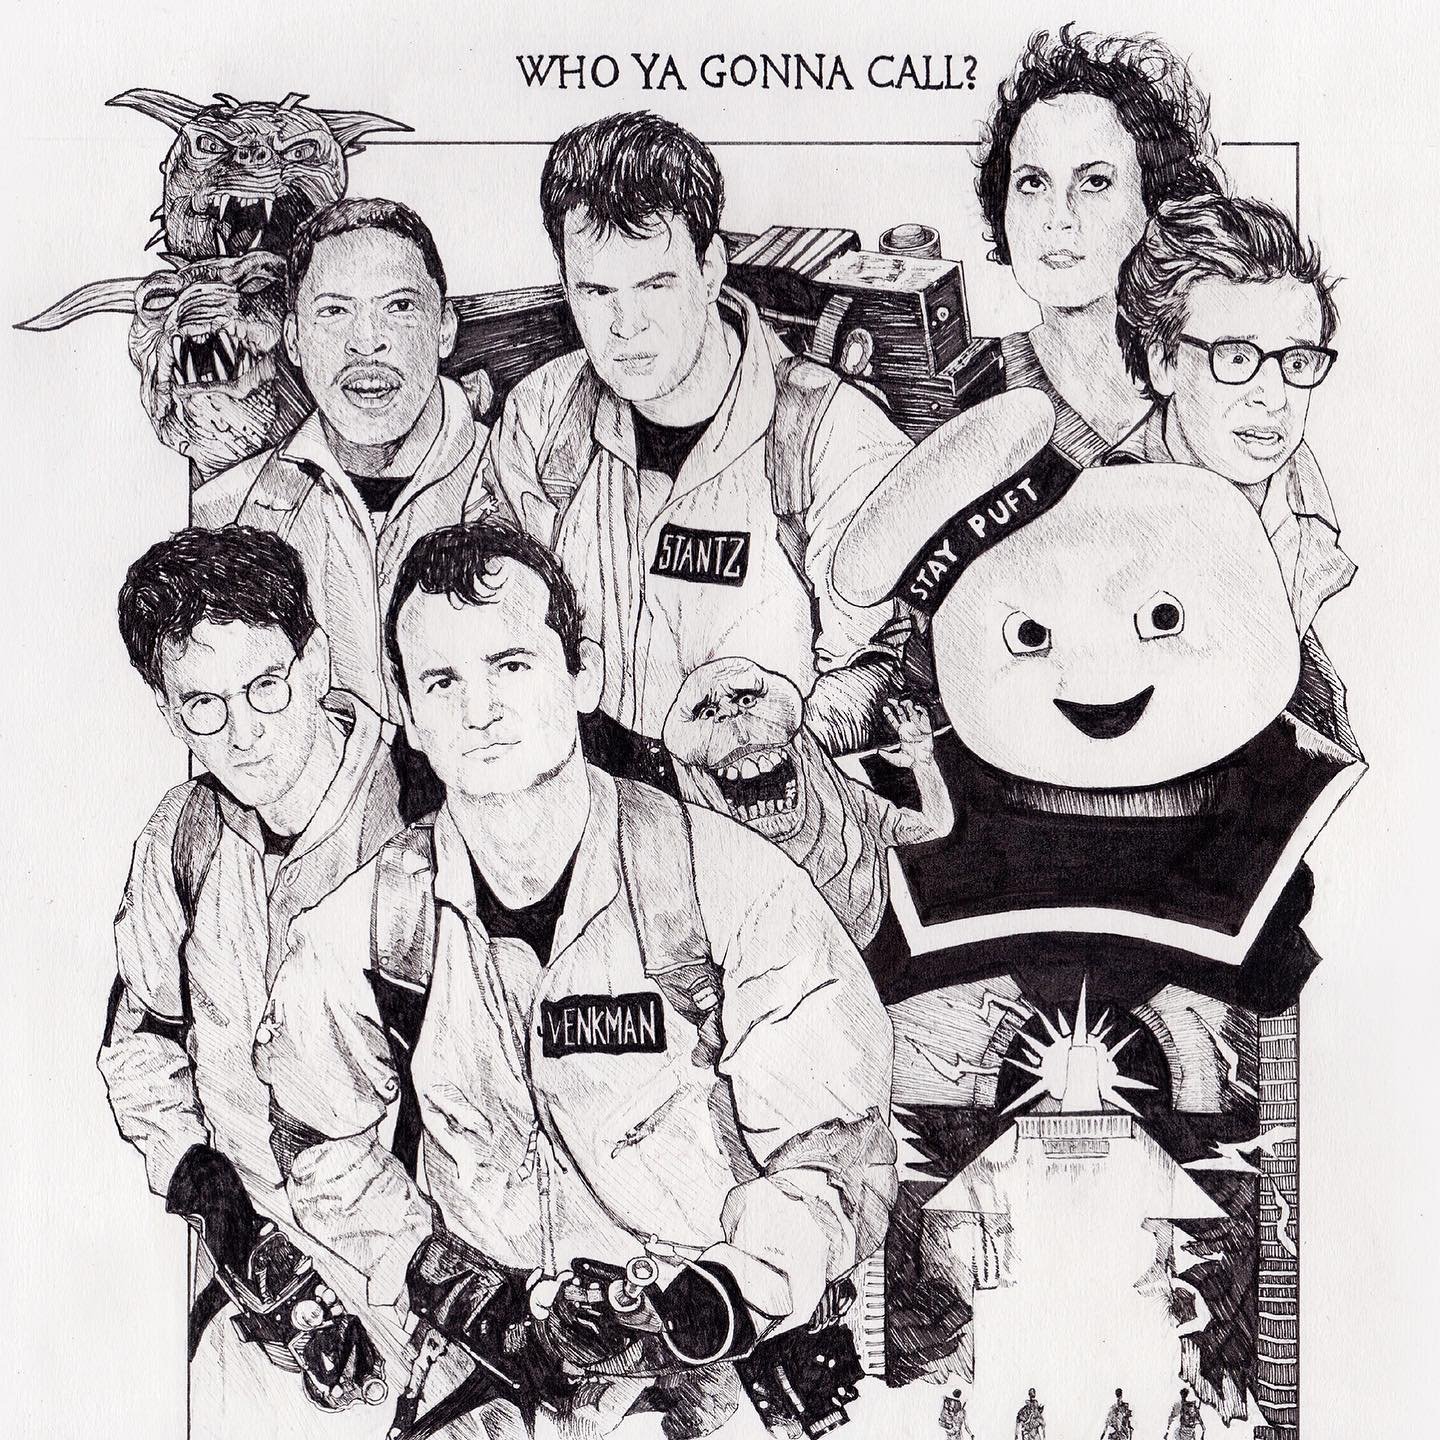 Original now sold! 👻 

Looking forward to unveiling a bunch of new work. Keep your eyes peeled! 🙂

#ghostbusters #movieposter #alternativemovieposter